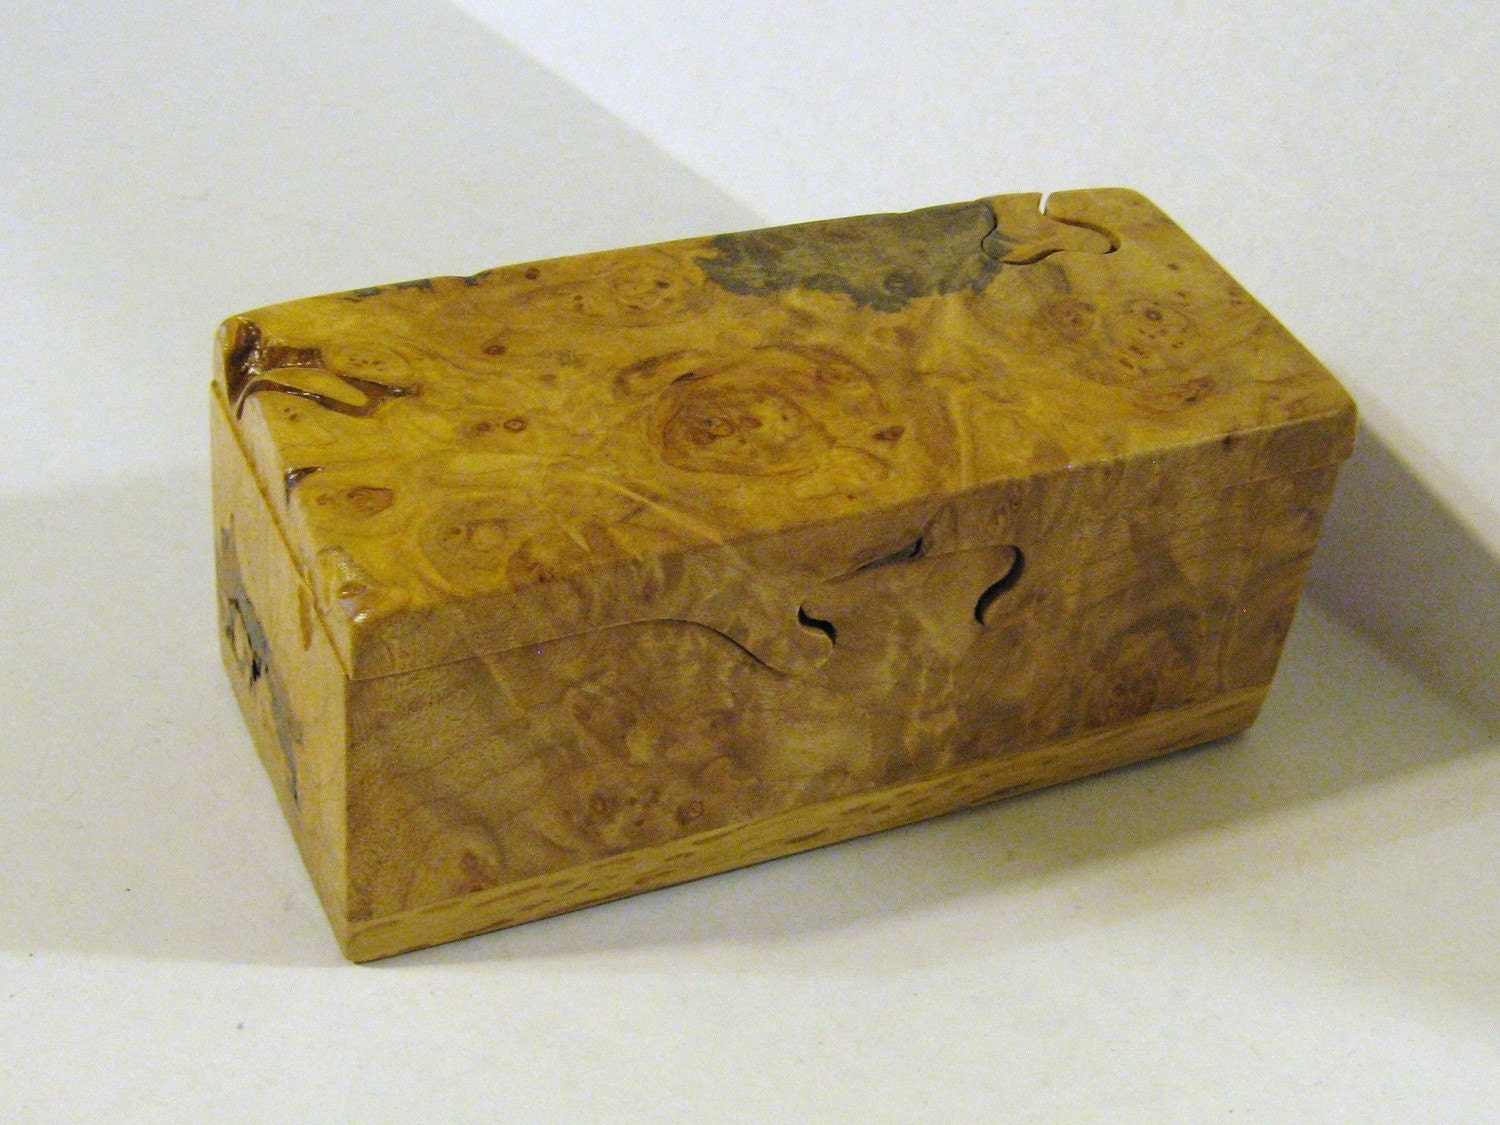 Puzzle Box Made Of Maple Burl wood